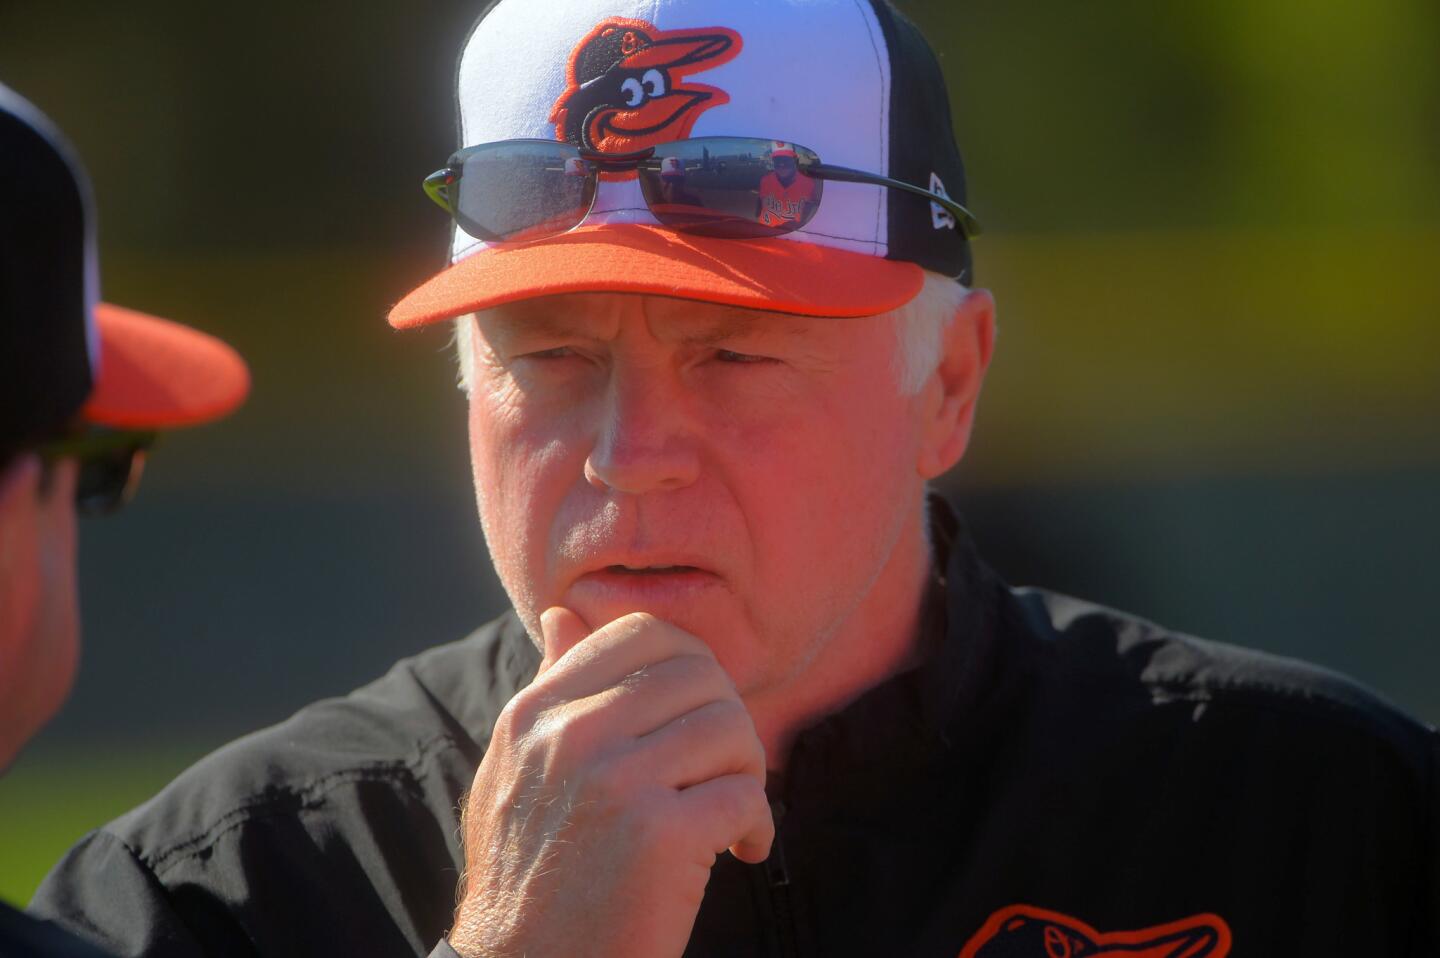 From 2010 to 2018, Buck Showalter compiled a 669-684 record as Orioles manager.